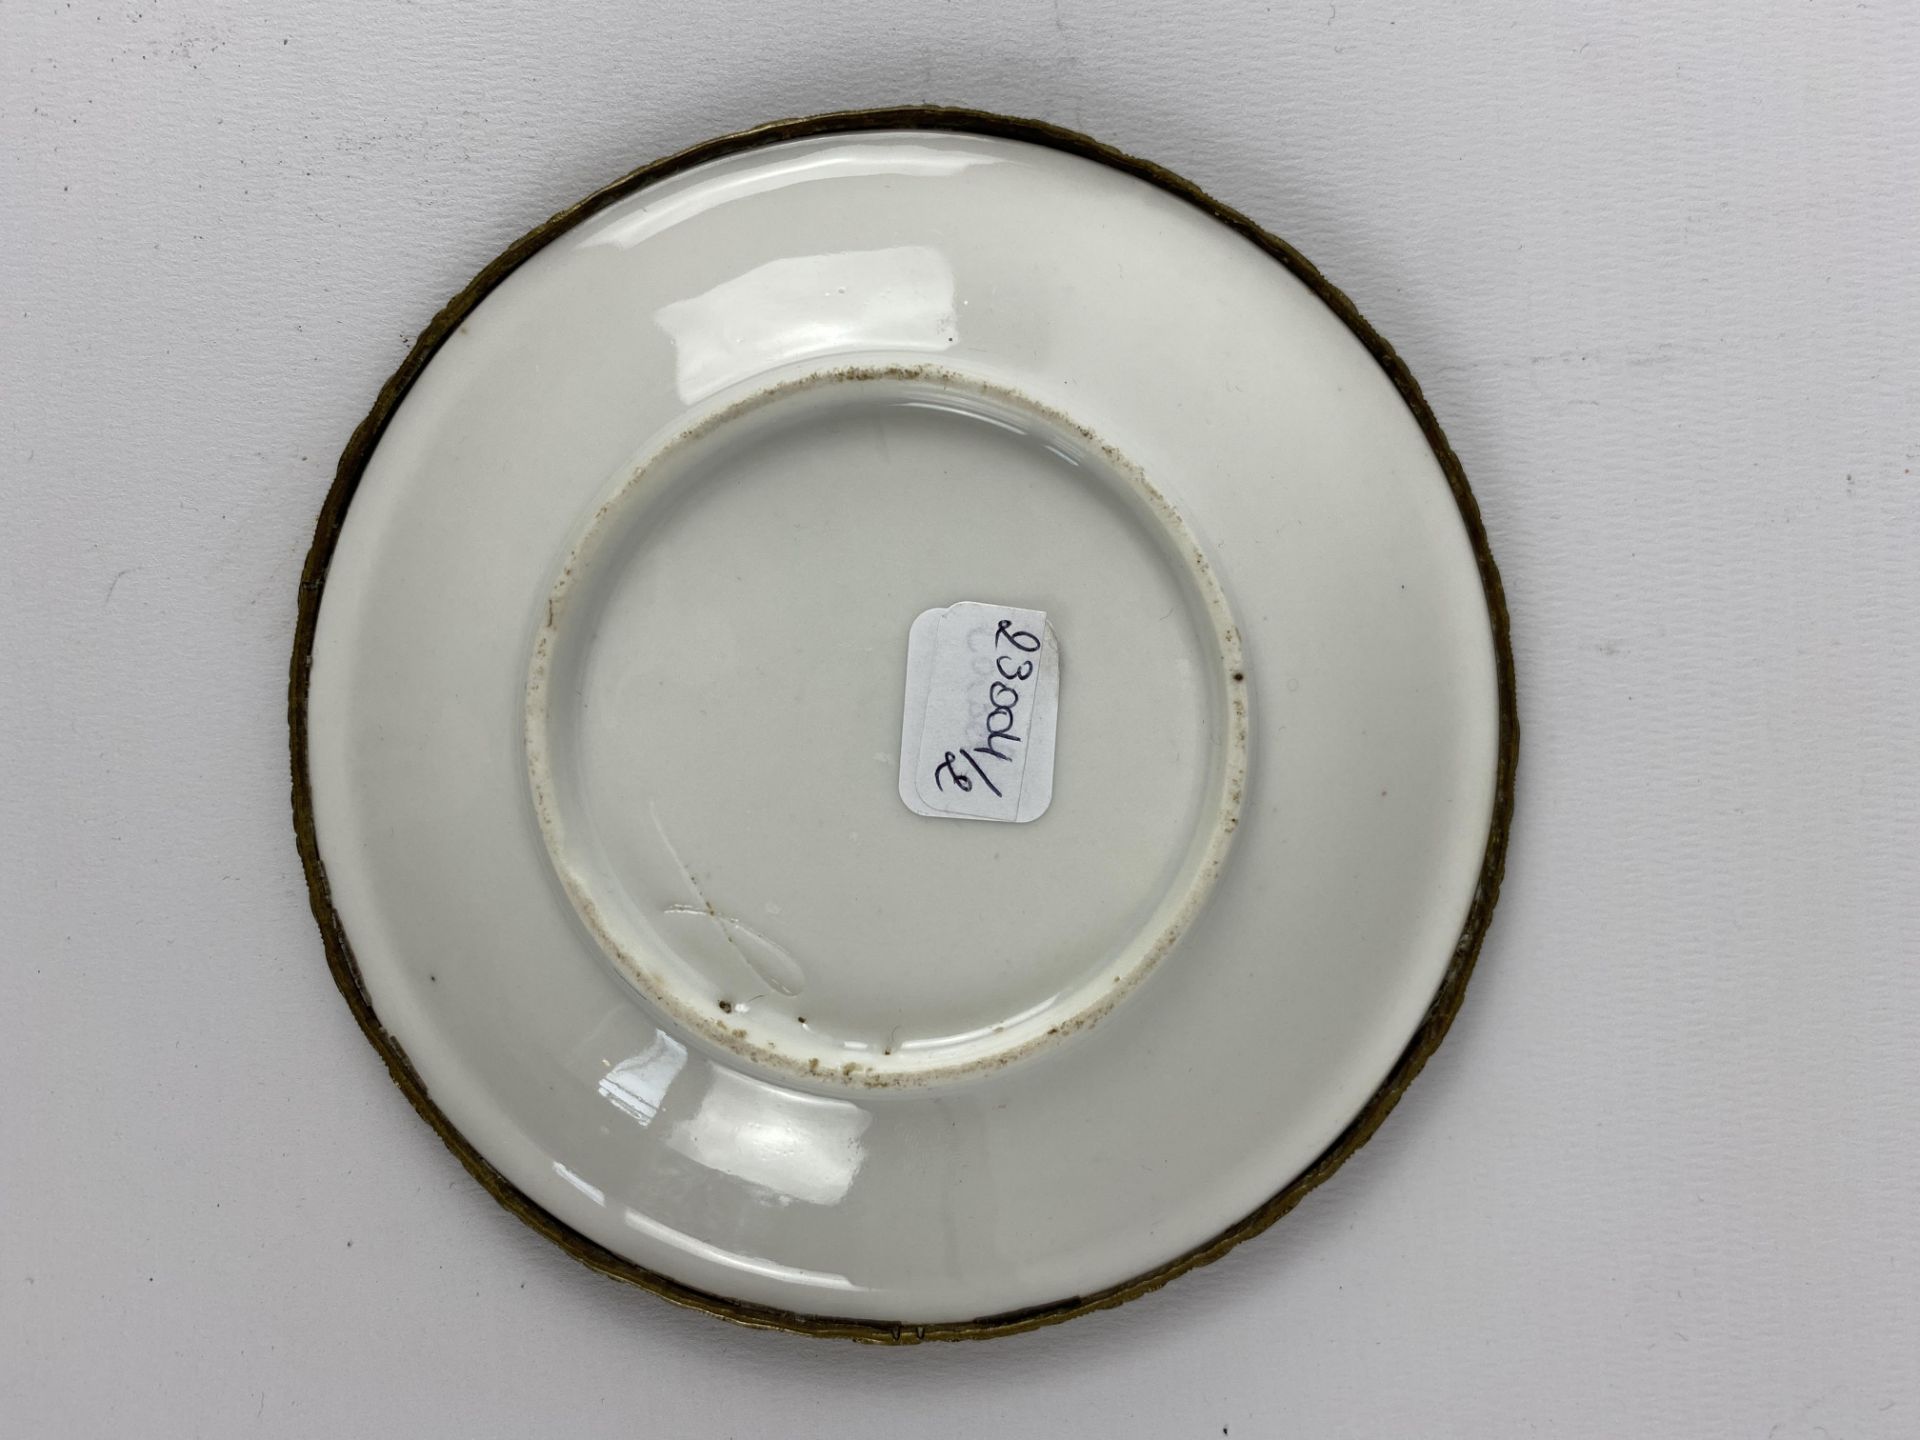 China, for EuropeEnameled porcelain cup, decorated with a palace sceneBrass frameDiam. : 14 cm. - Image 2 of 2